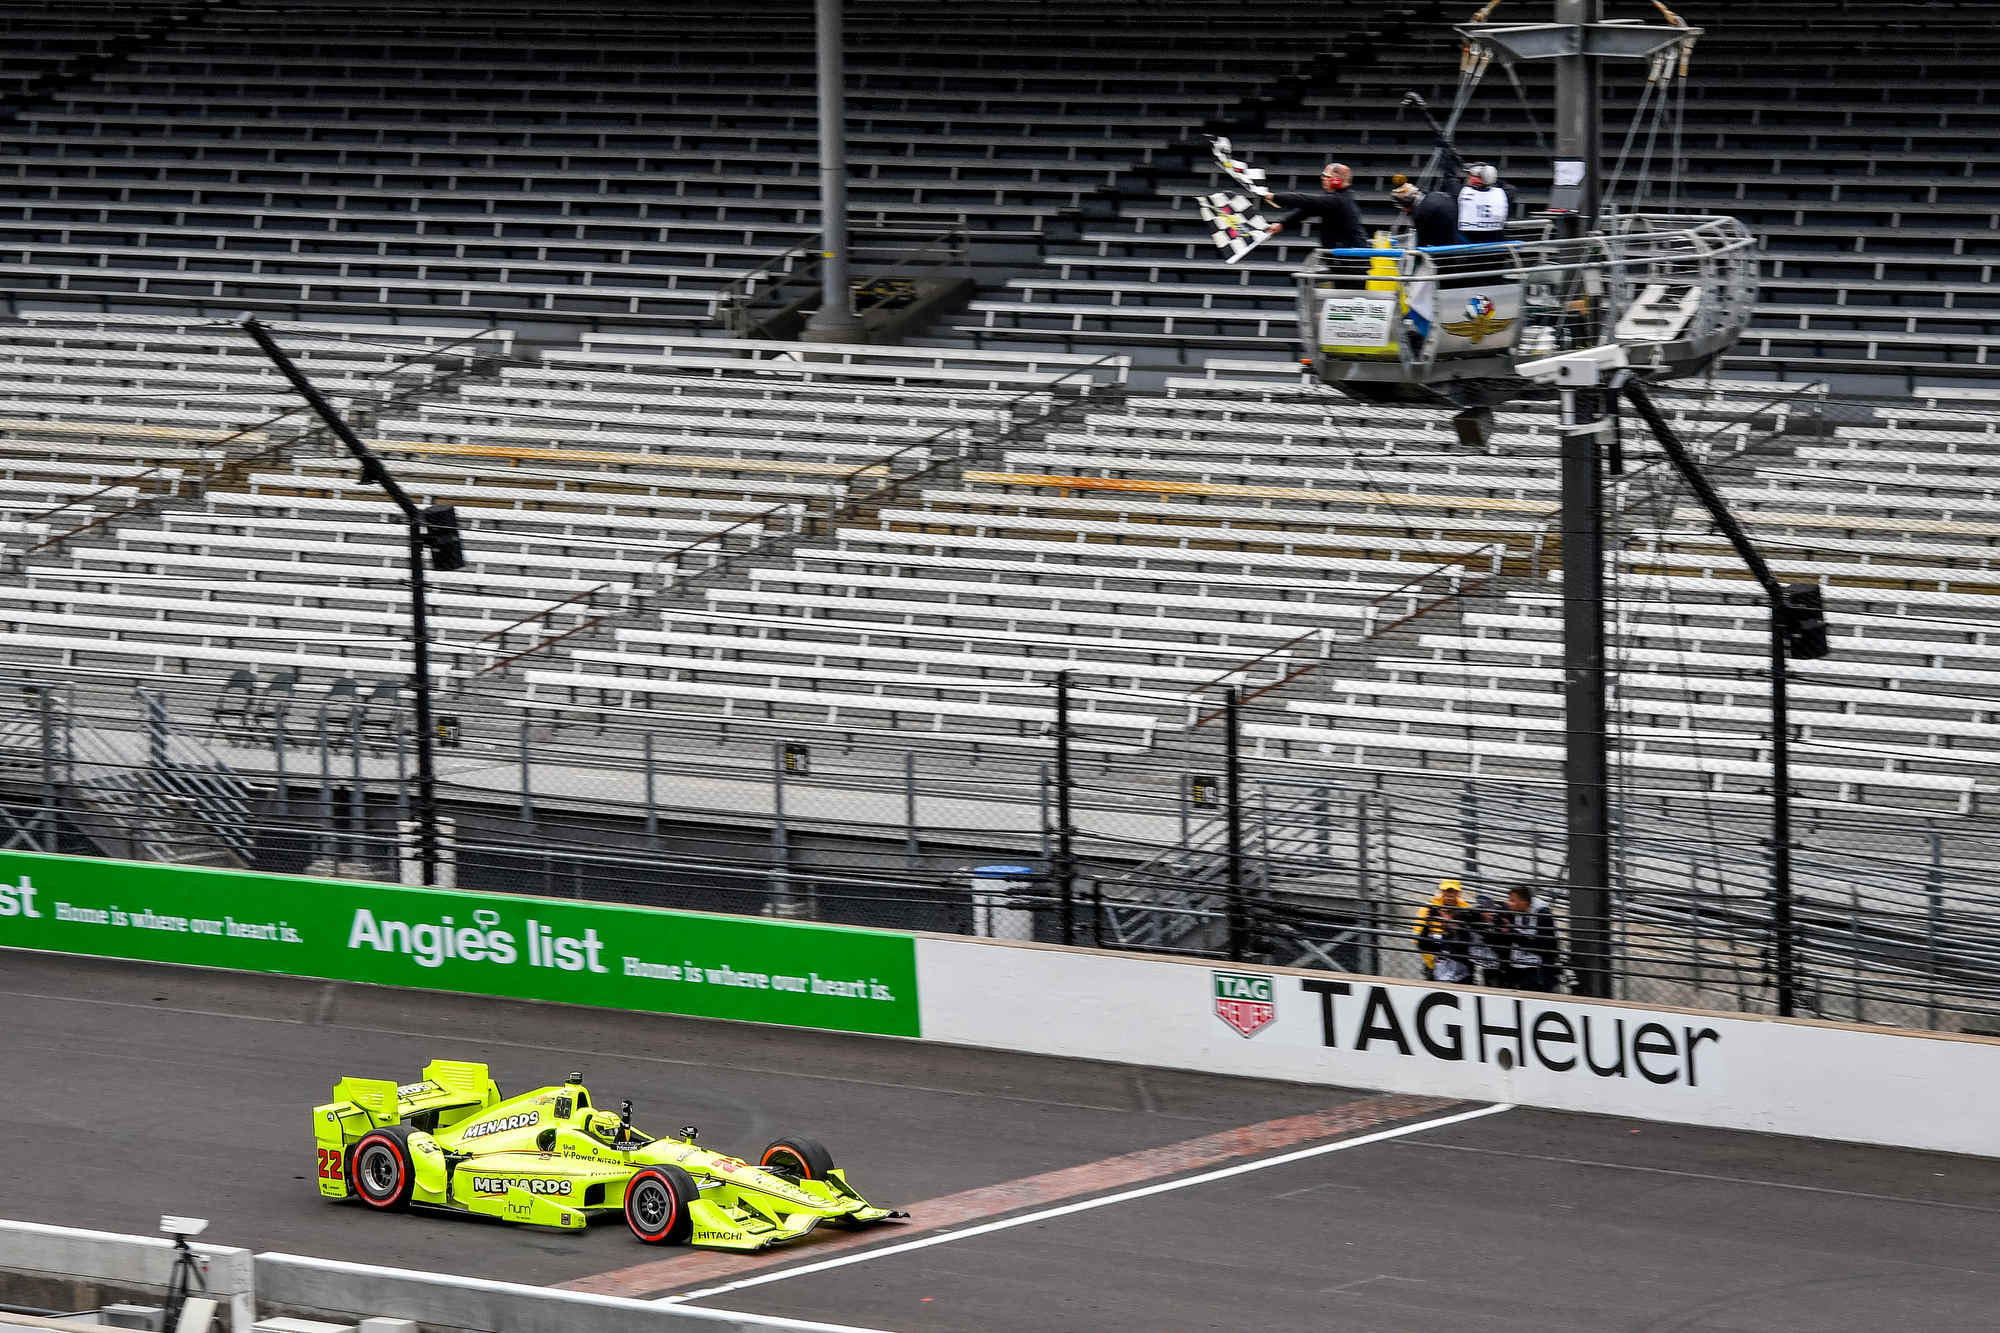 Pagenaud wins again. Too bad there was hardly anyone there to see it